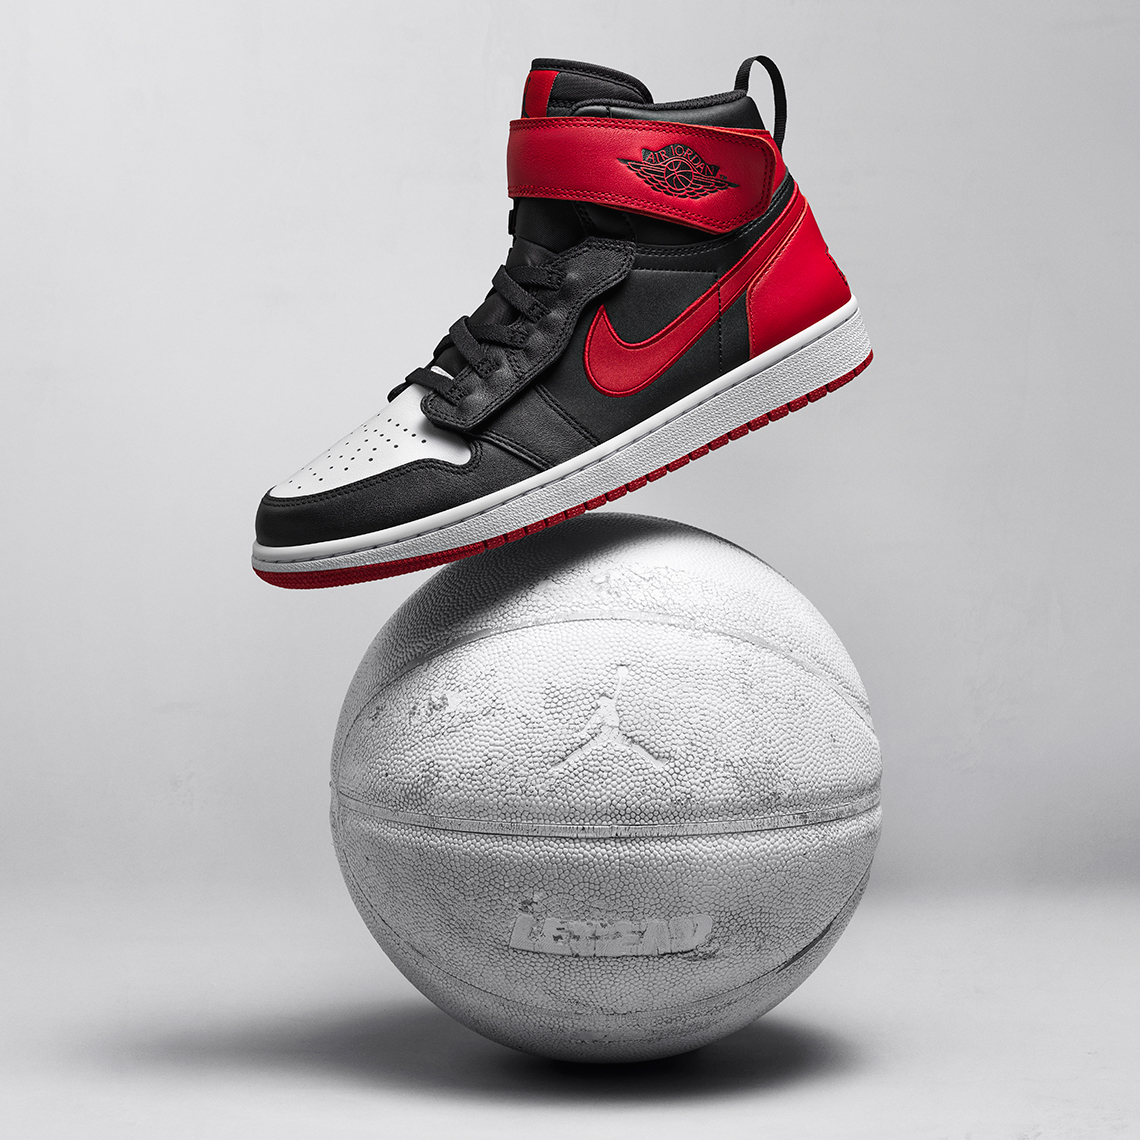 A Full Look At The Air Jordan 1 Fearless Ones Collection Fashion Inspiration And Discovery